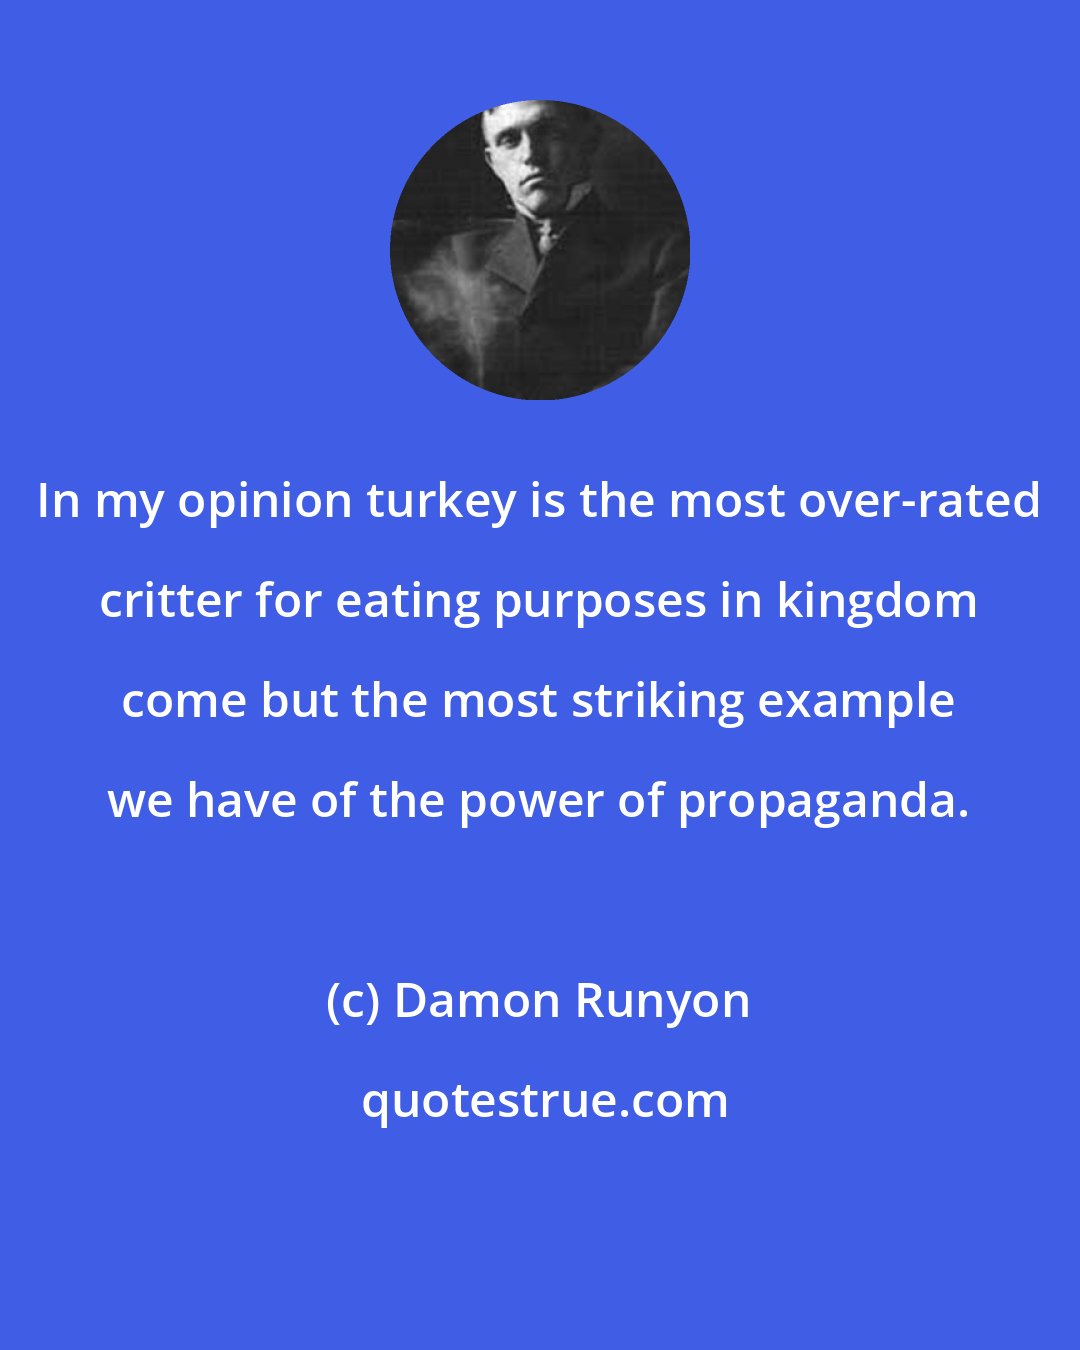 Damon Runyon: In my opinion turkey is the most over-rated critter for eating purposes in kingdom come but the most striking example we have of the power of propaganda.